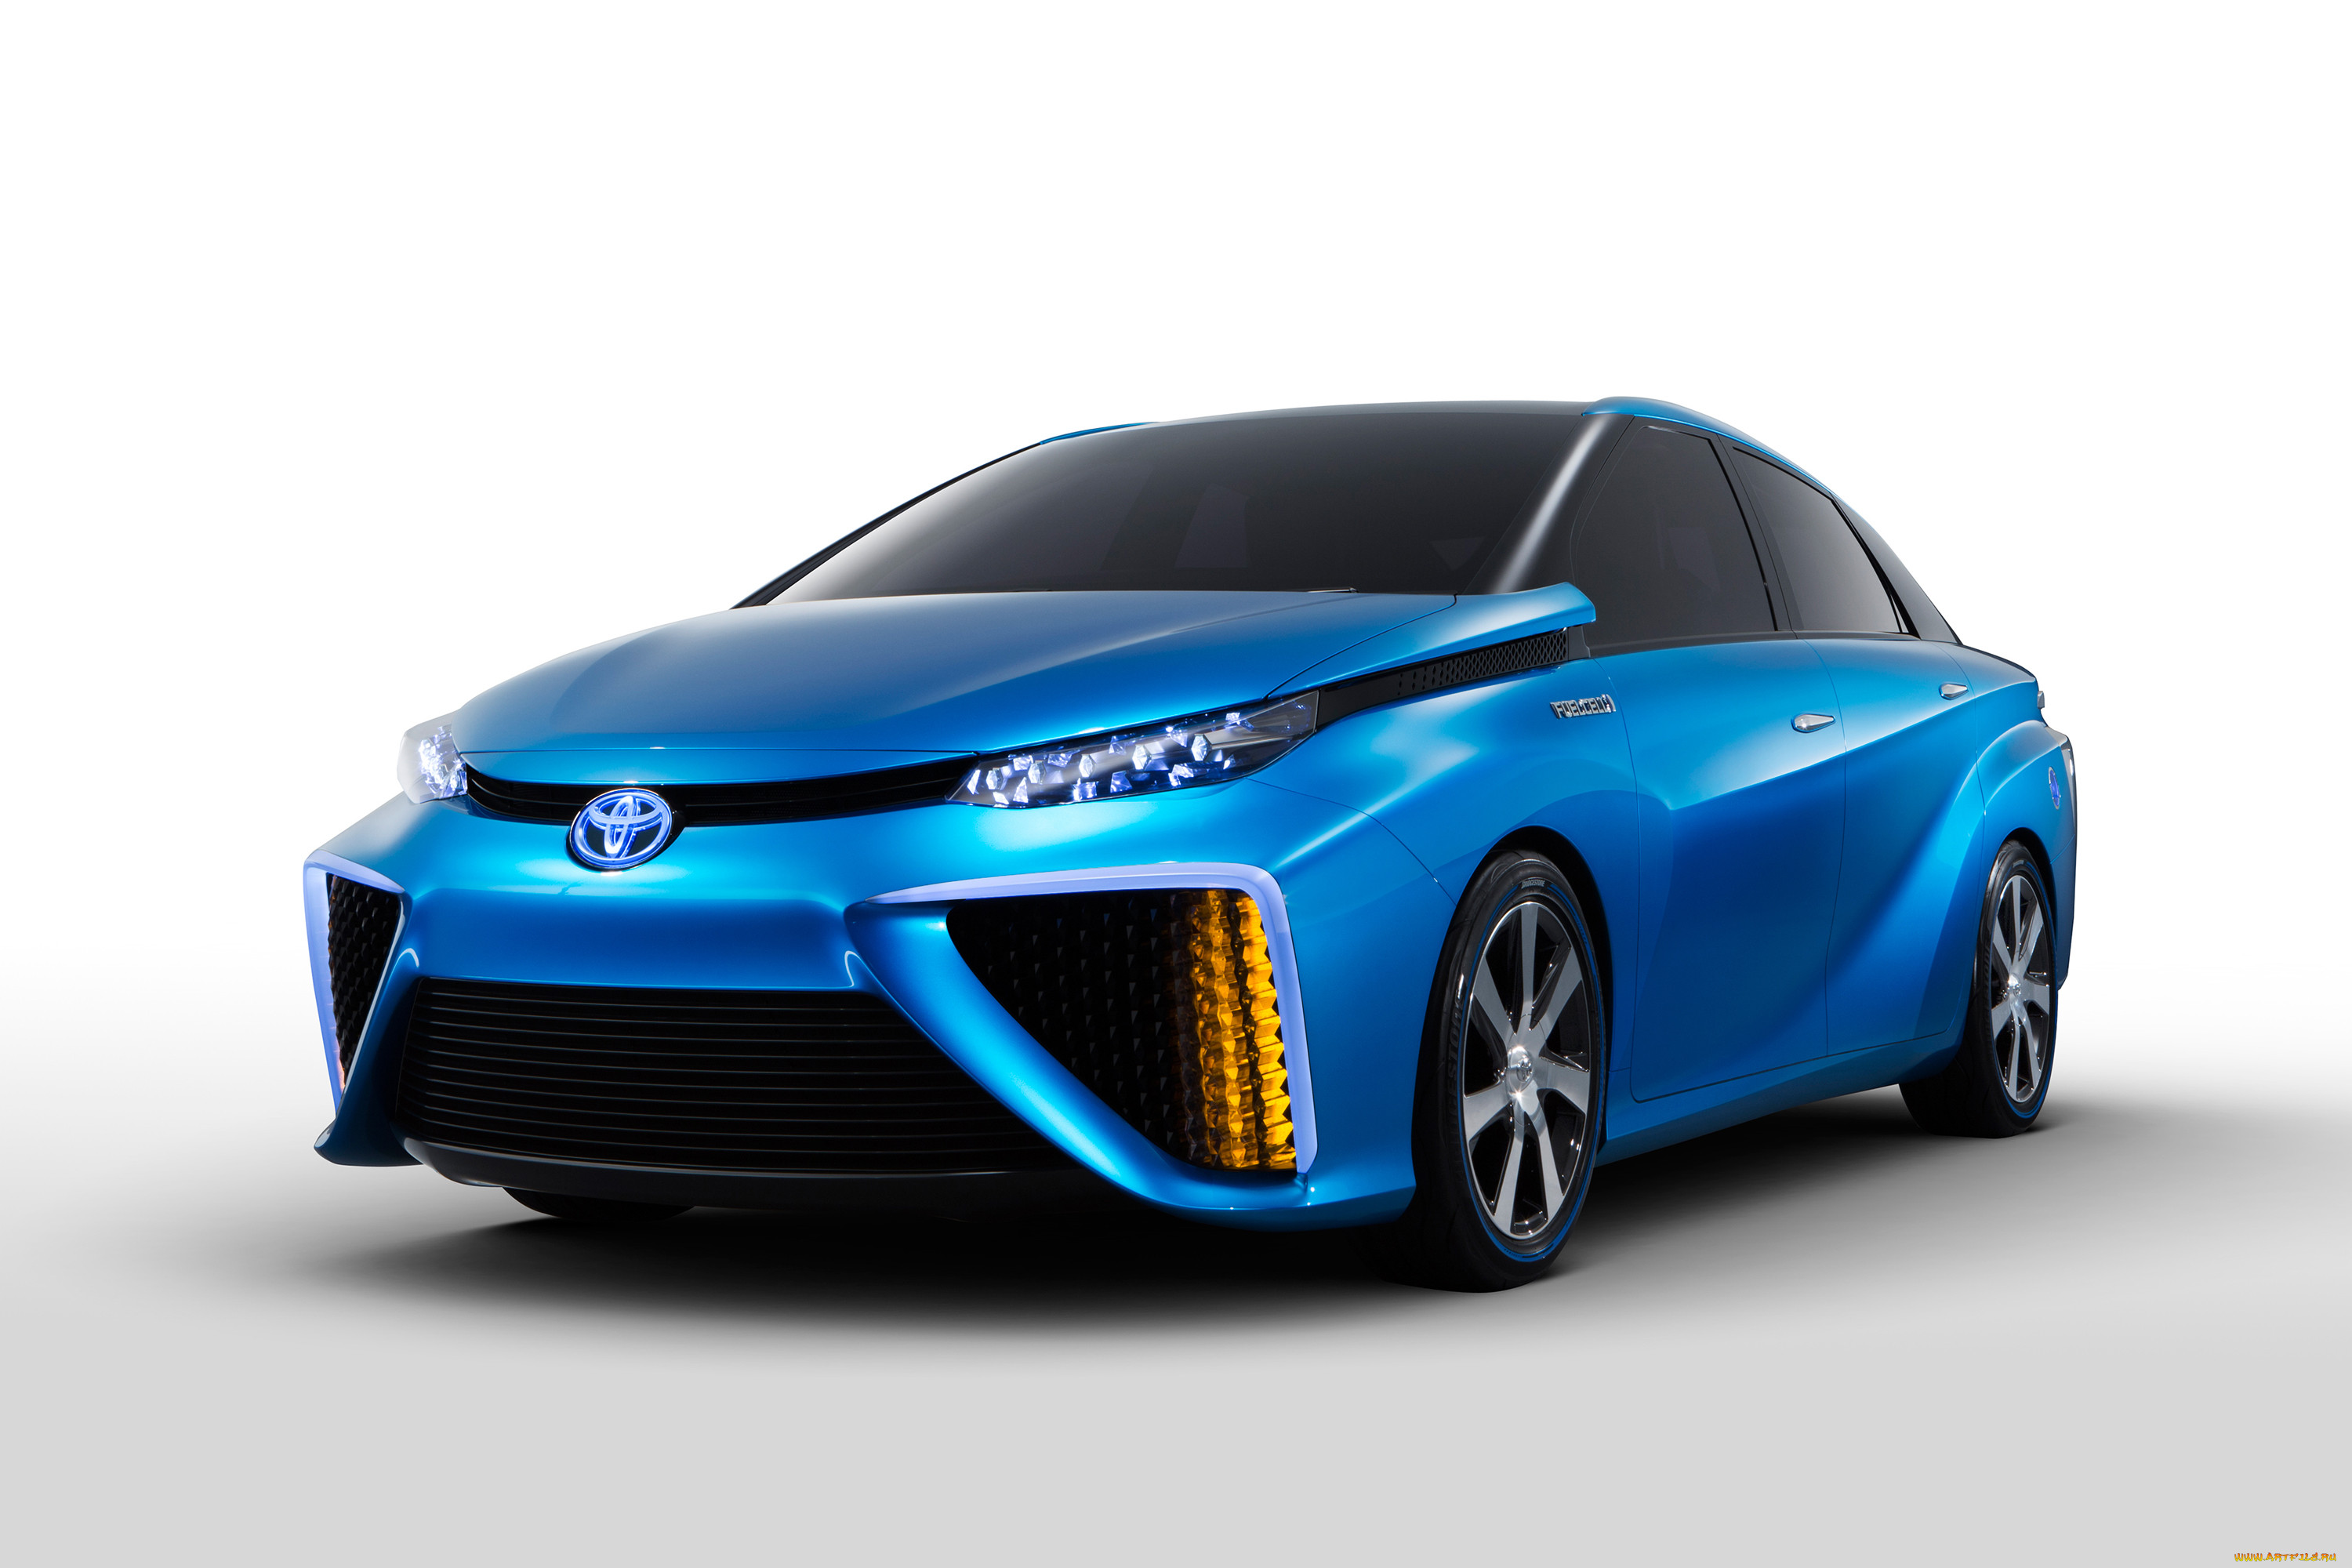 2014 toyota fuel cell vehicle, , toyota, , 